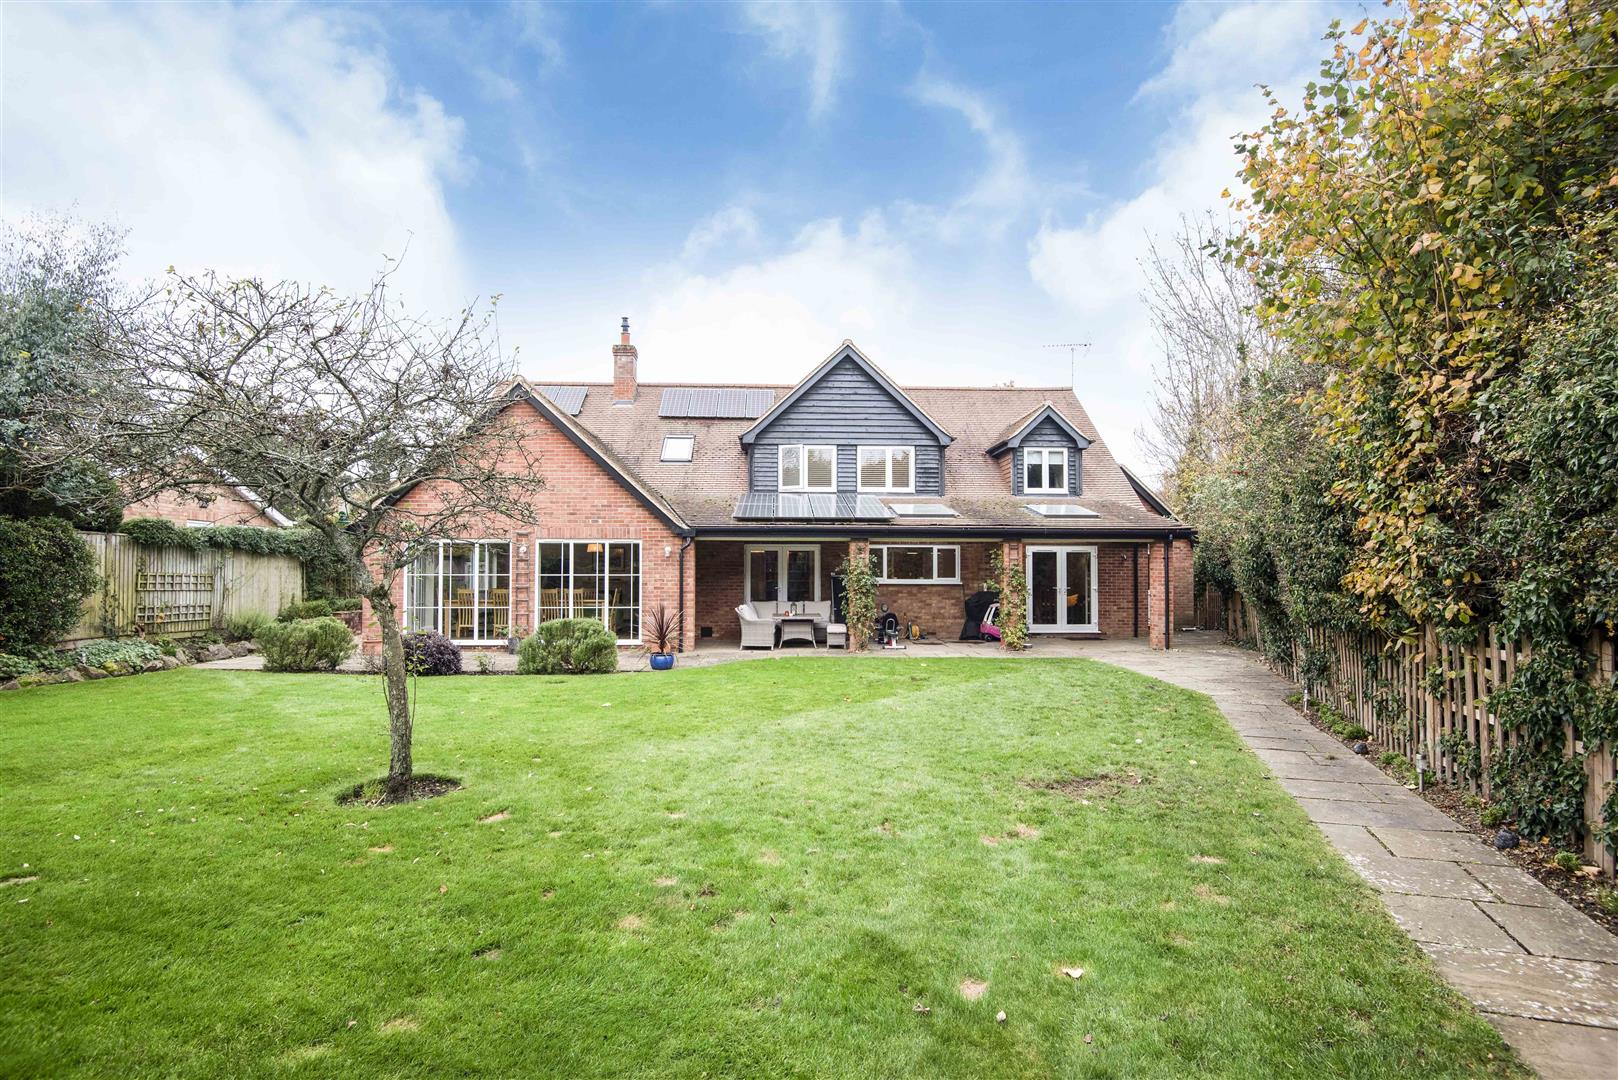 Horsepond Road Gallowstree Common house for sale in Reading